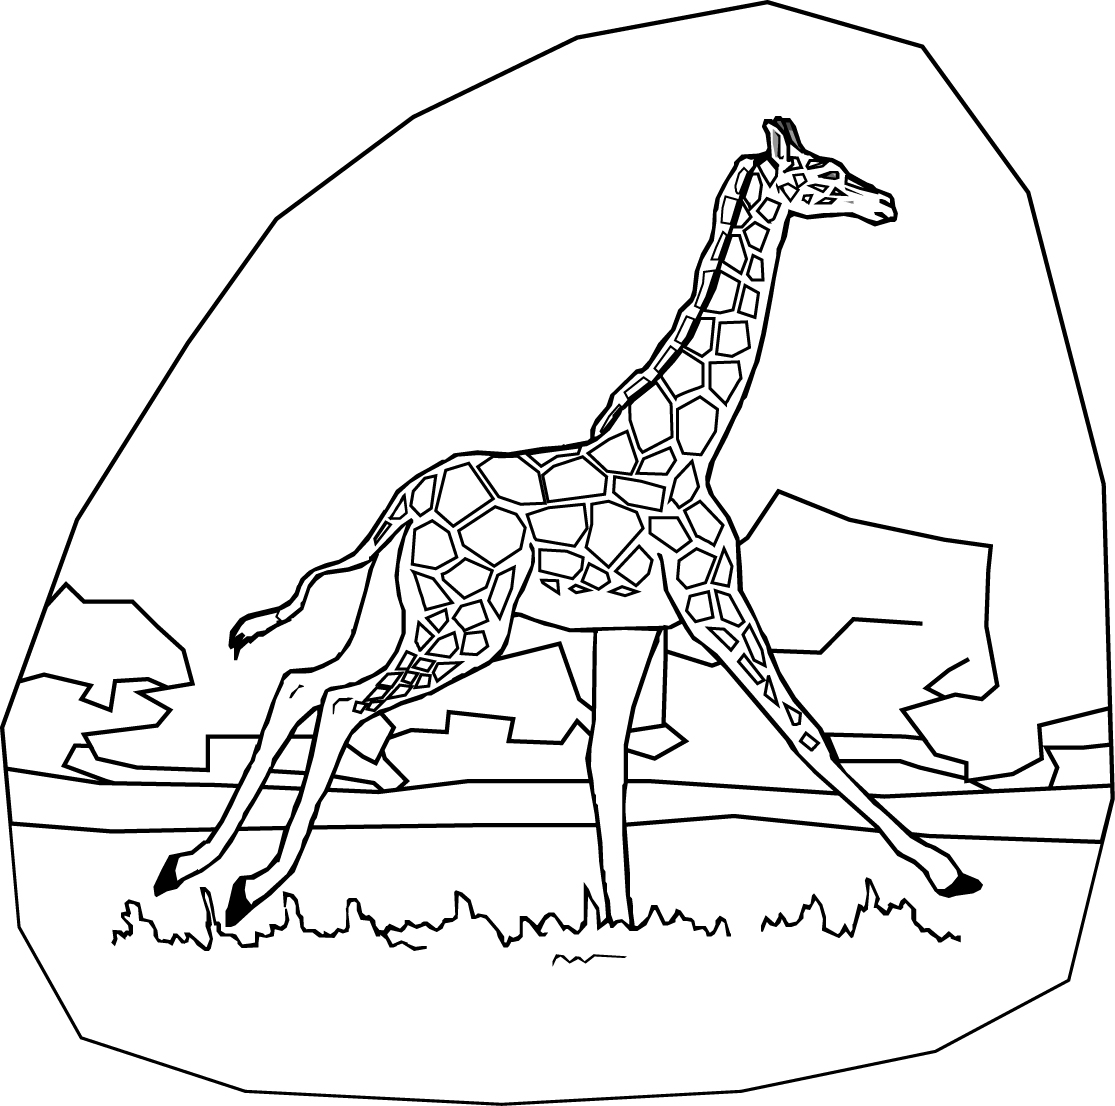 Download Coloring Pages for Kids: Giraffe Coloring Pages for Kids